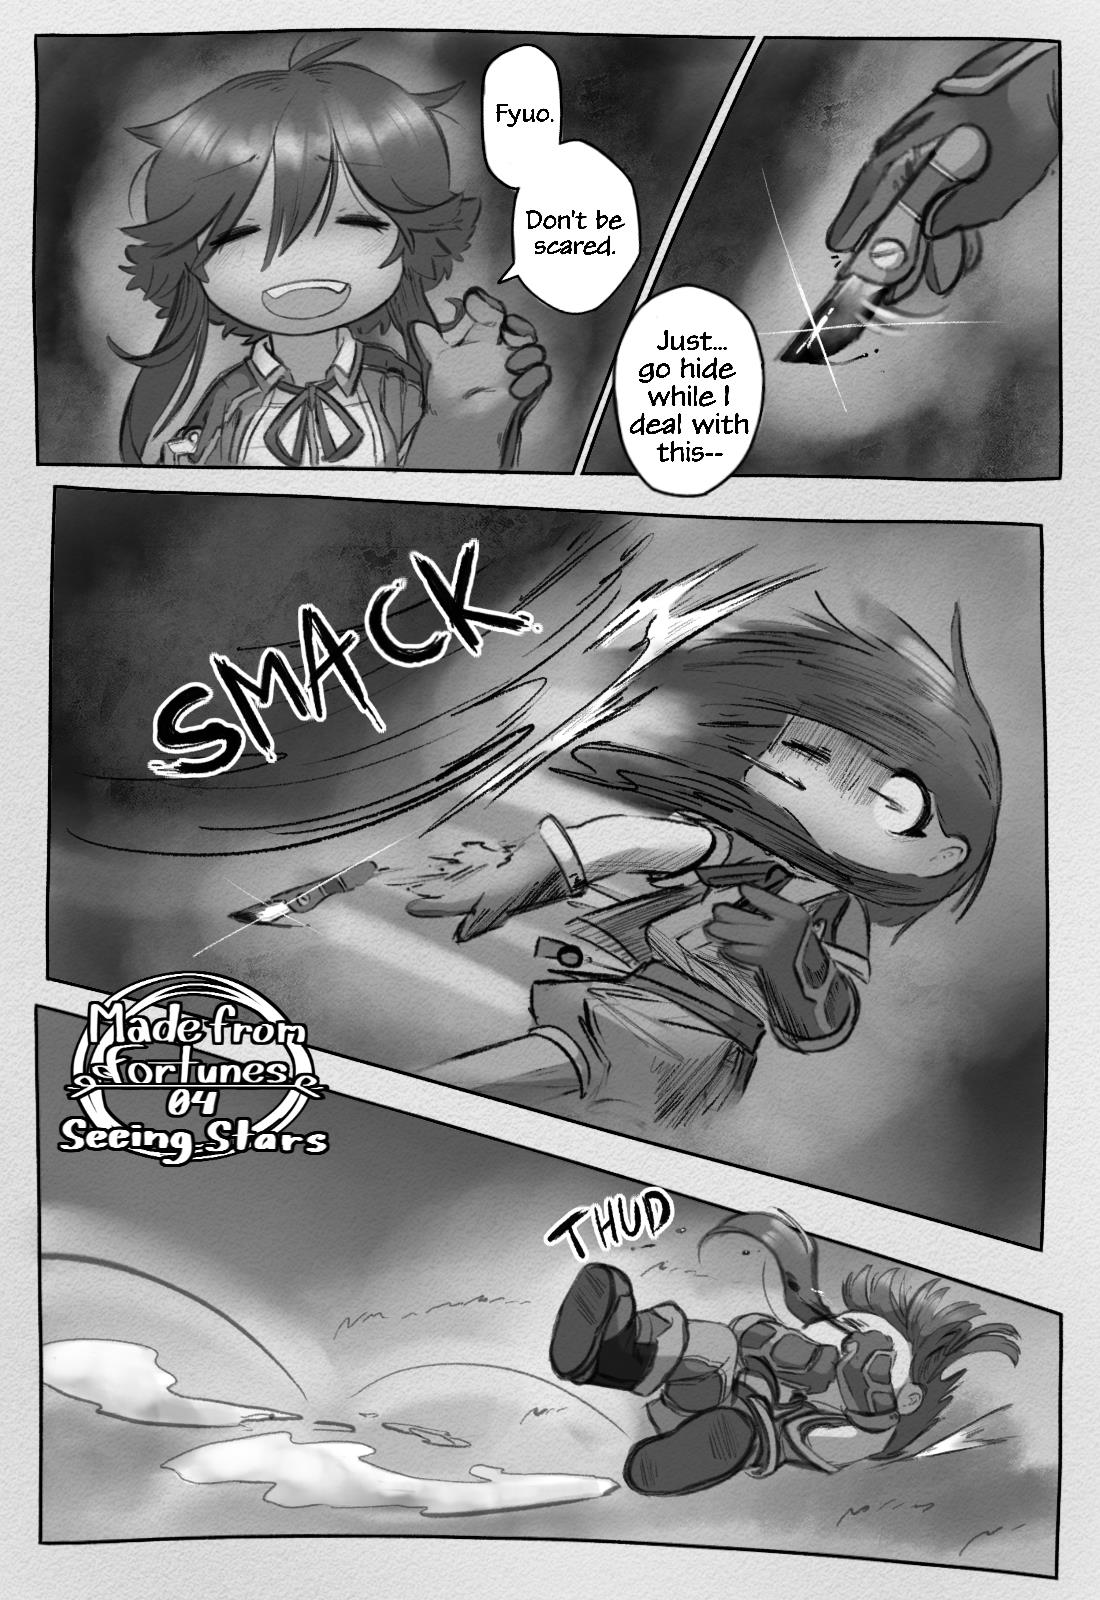 Made From Fortunes (Made In Abyss Fanmade Comic) Vol.1 Chapter 4: Seeing Stars - Picture 1